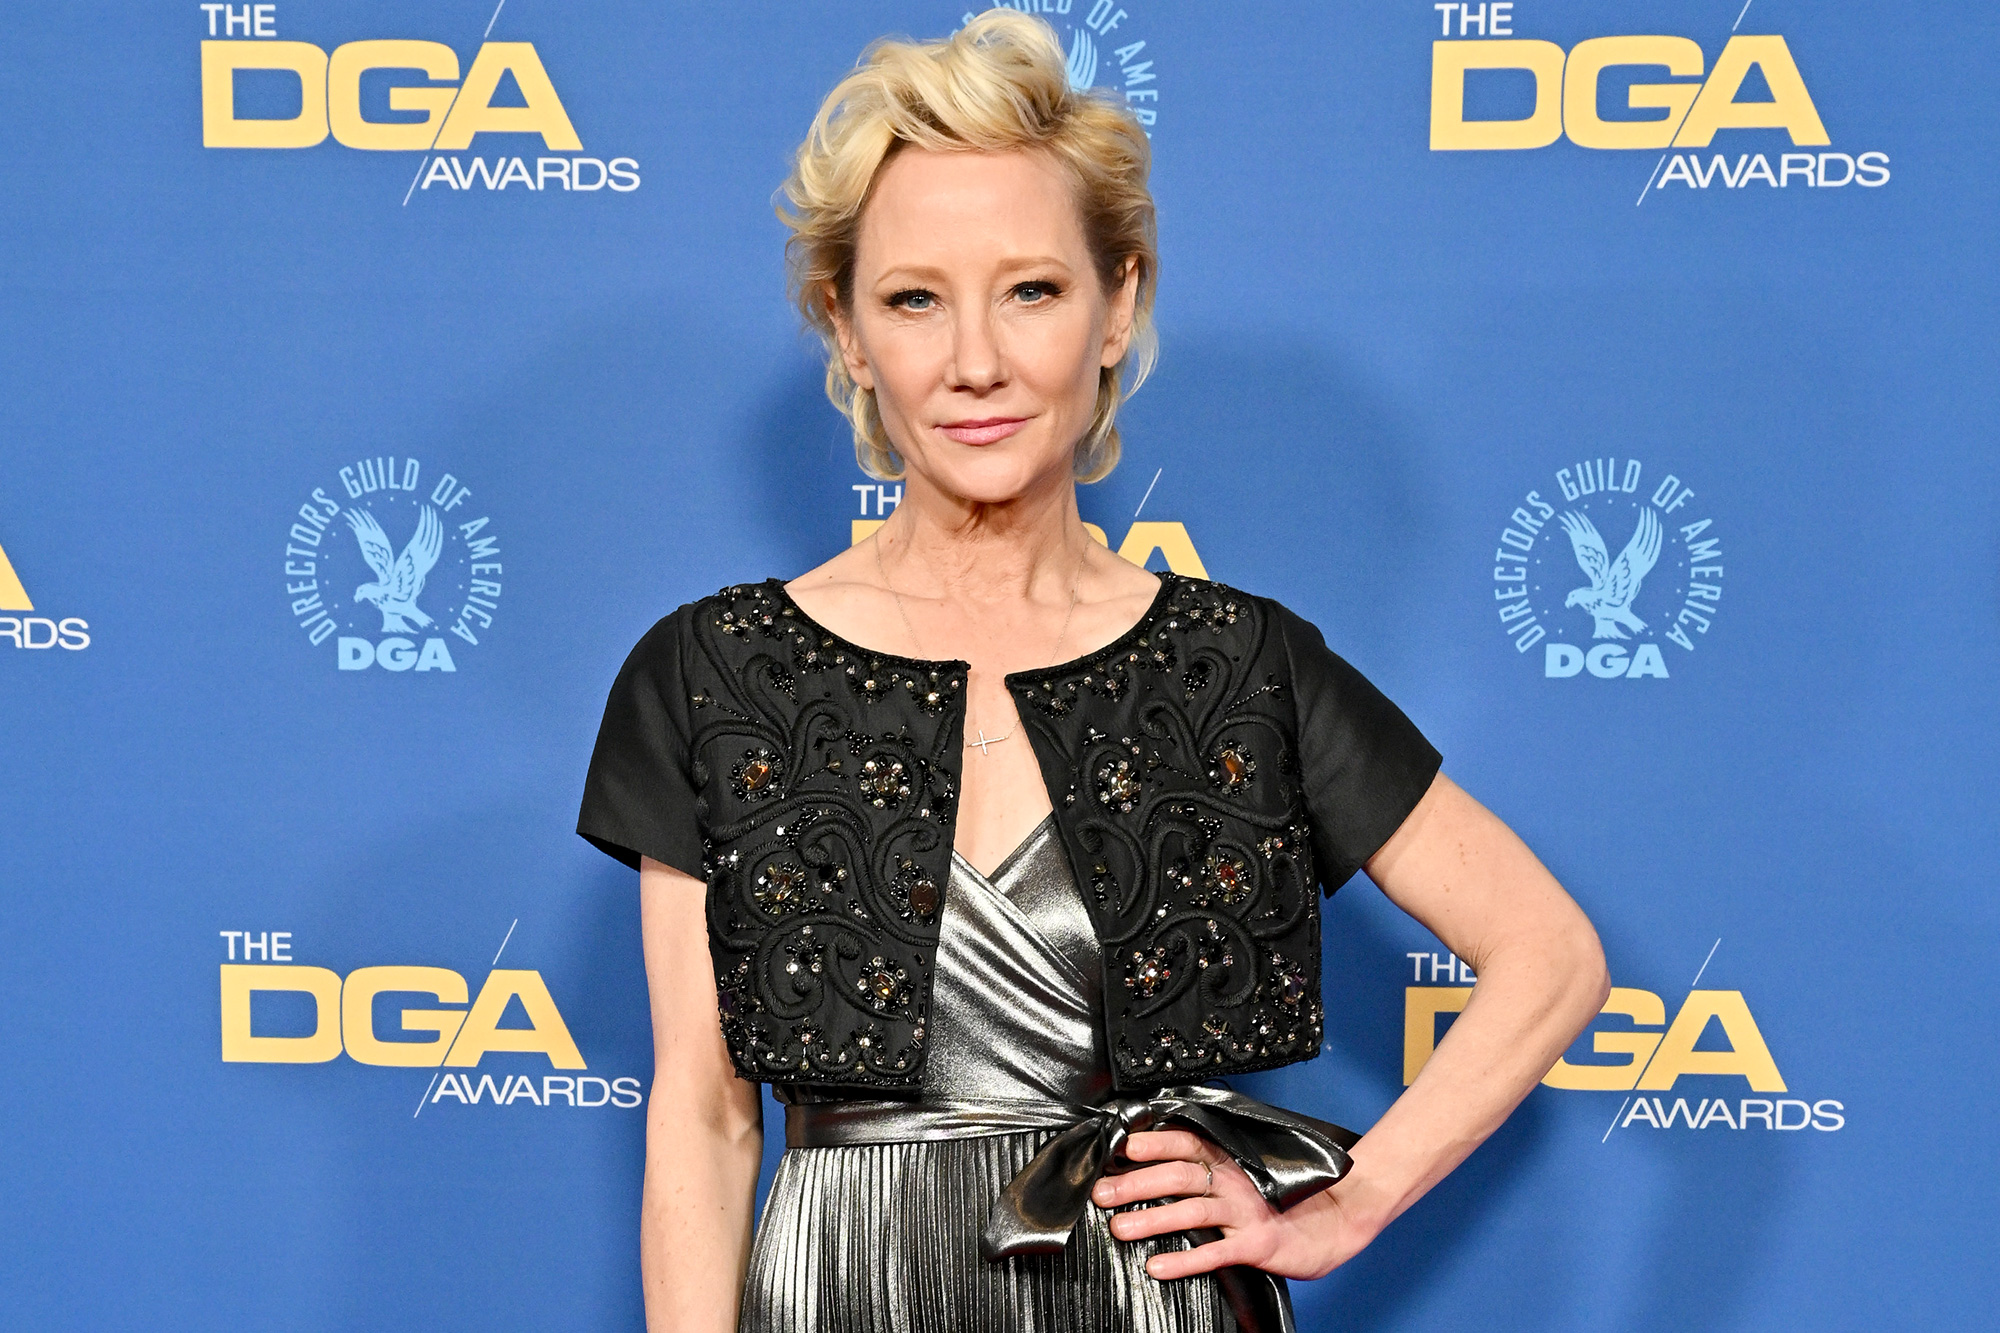 Anne Heche Died After A Car Crash - The Actress Died After Being Taken Off Life Support